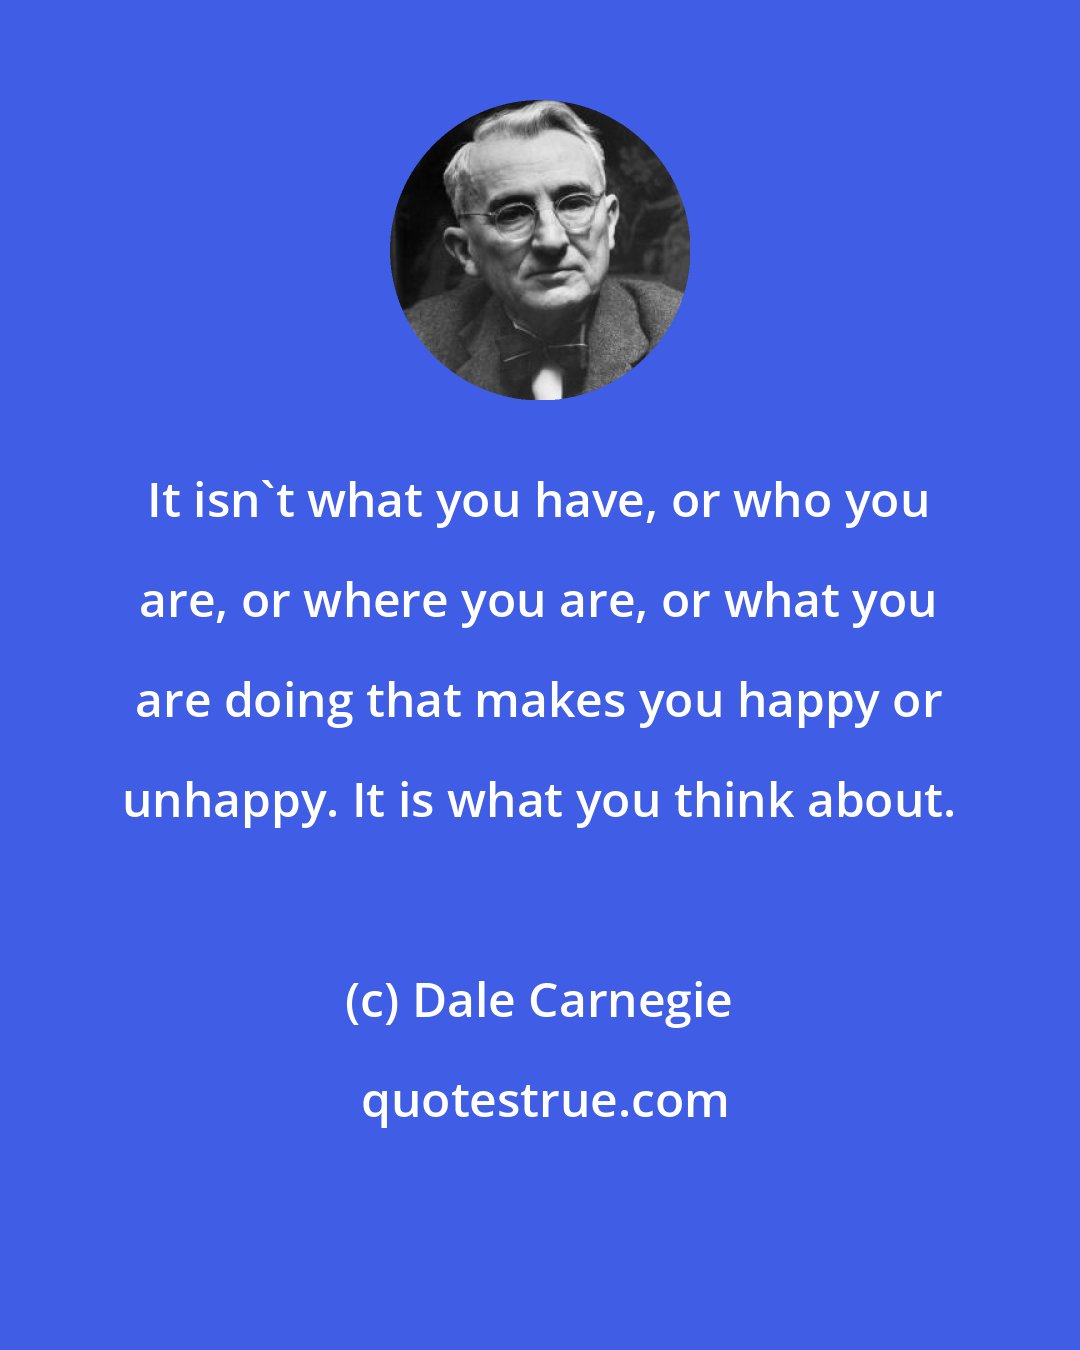 Dale Carnegie: It isn't what you have, or who you are, or where you are, or what you are doing that makes you happy or unhappy. It is what you think about.